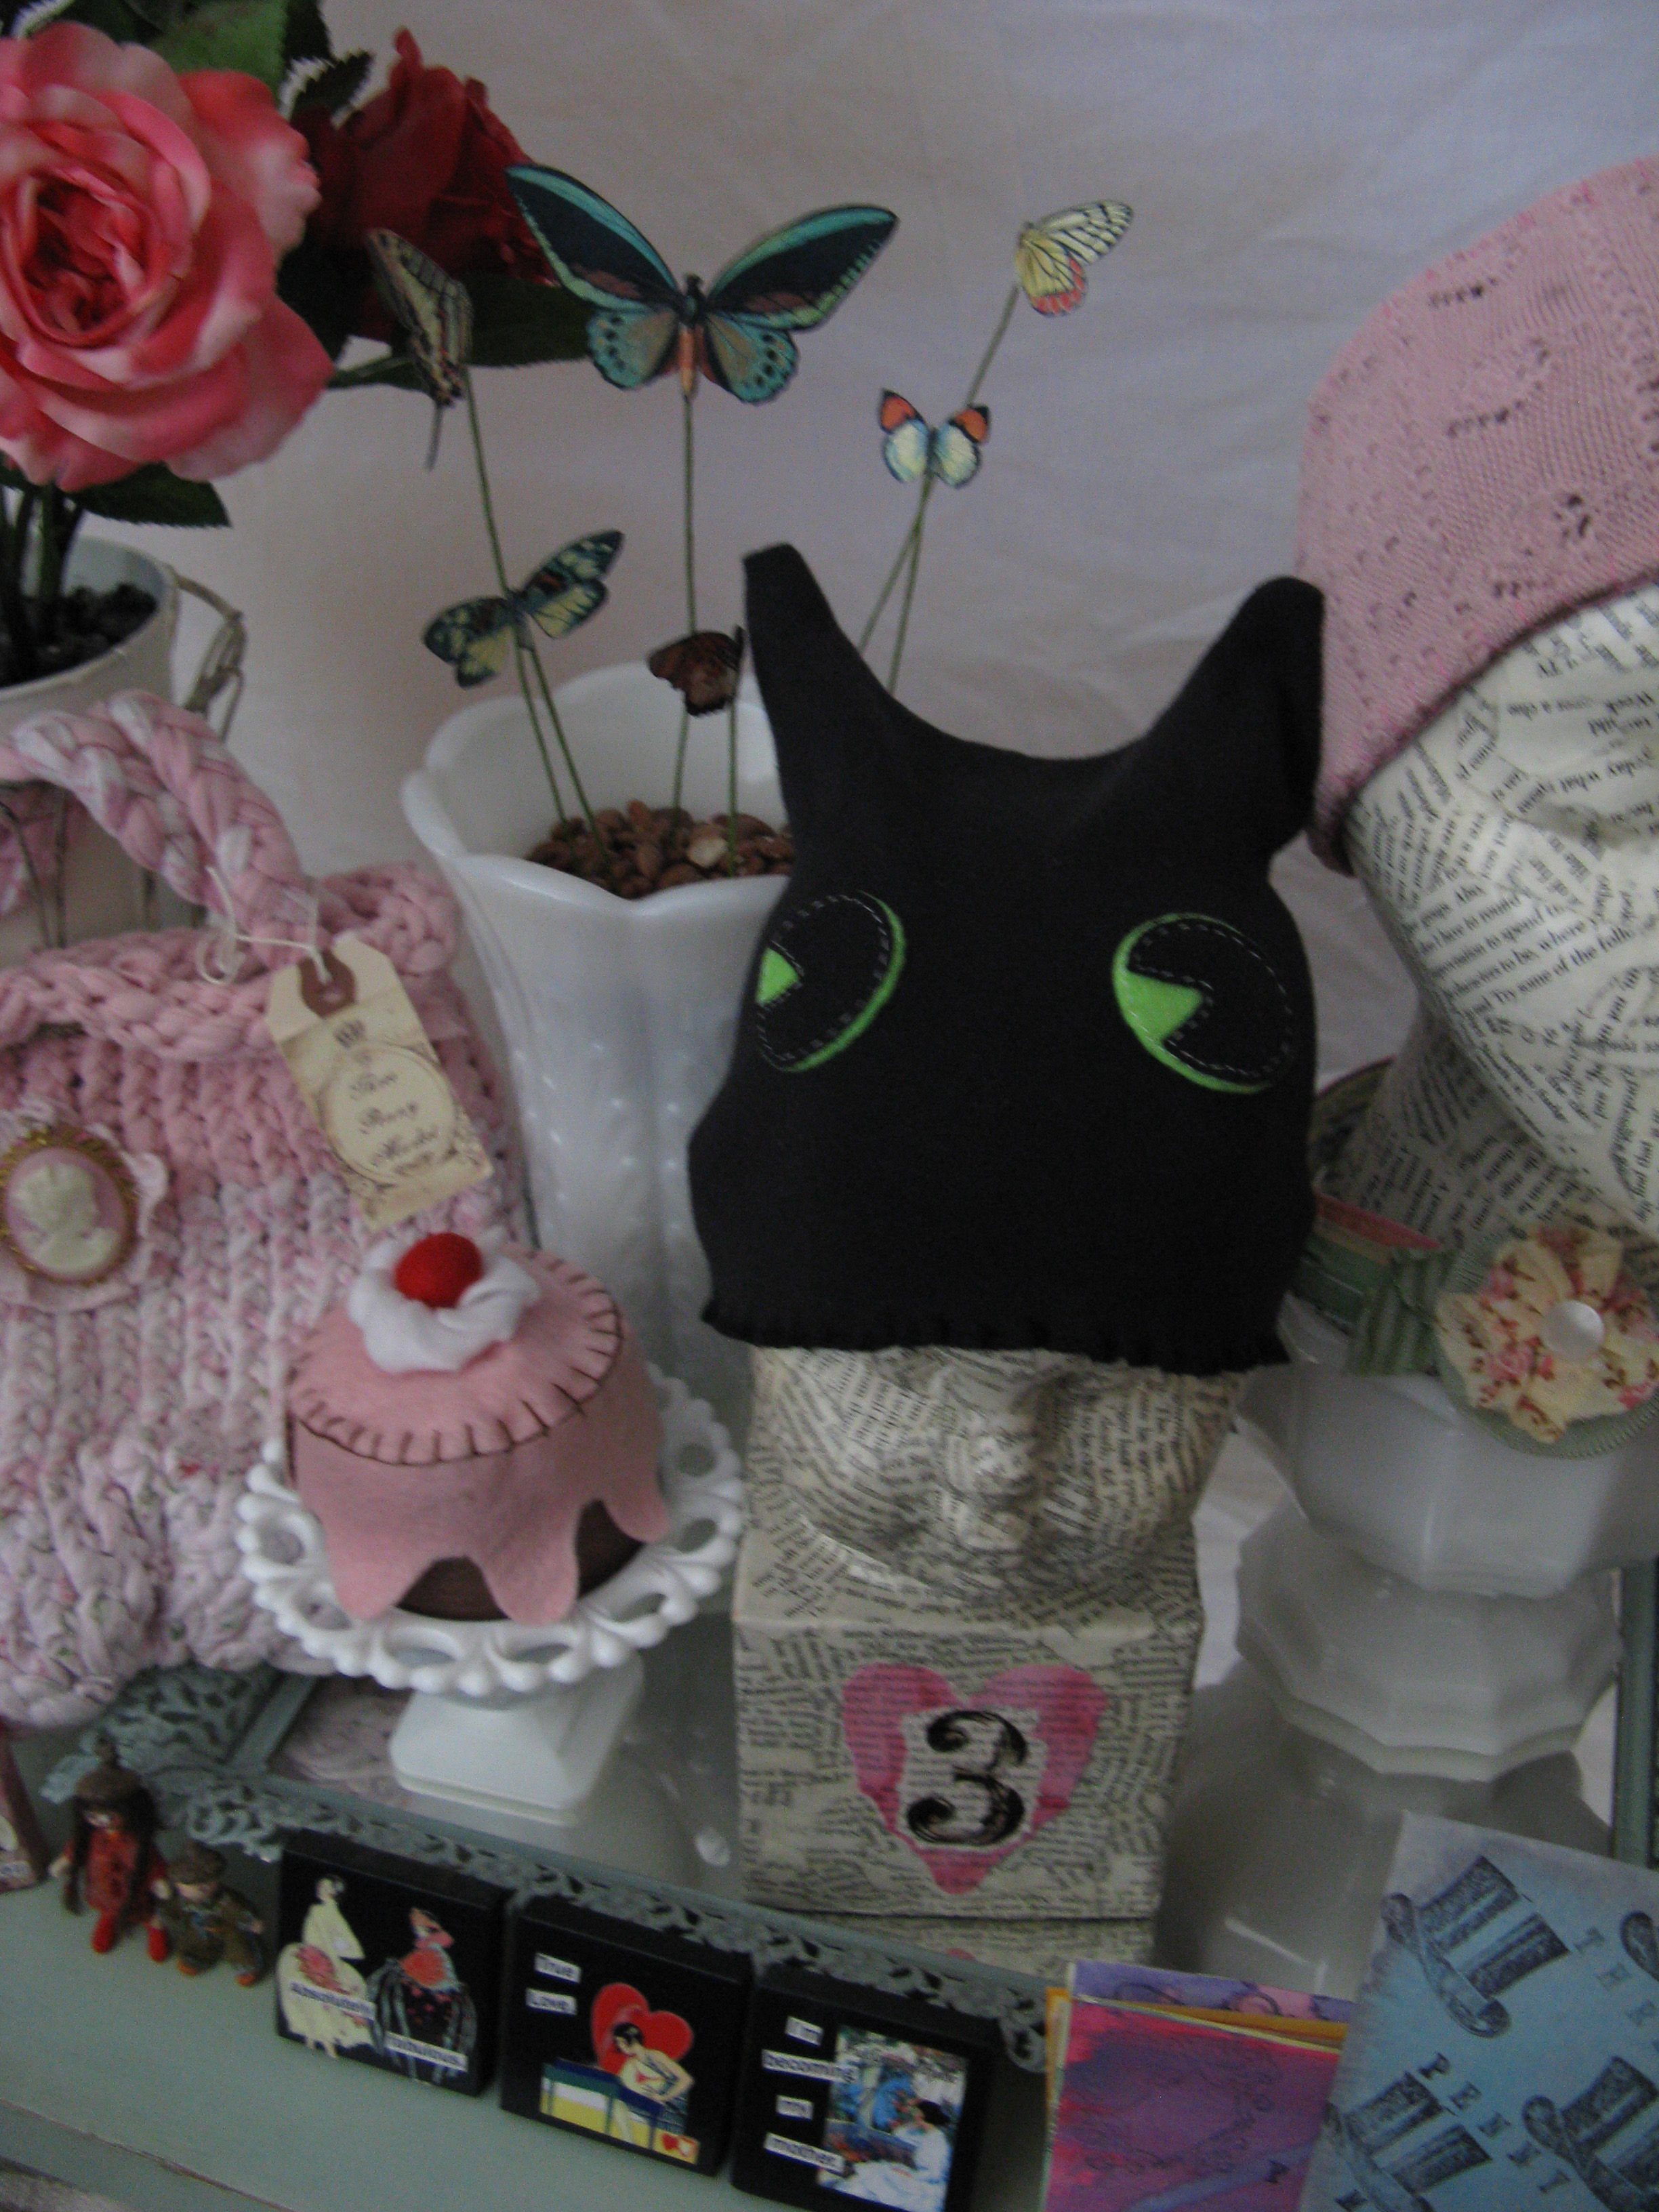 Kitty baby hat and felt cake detail